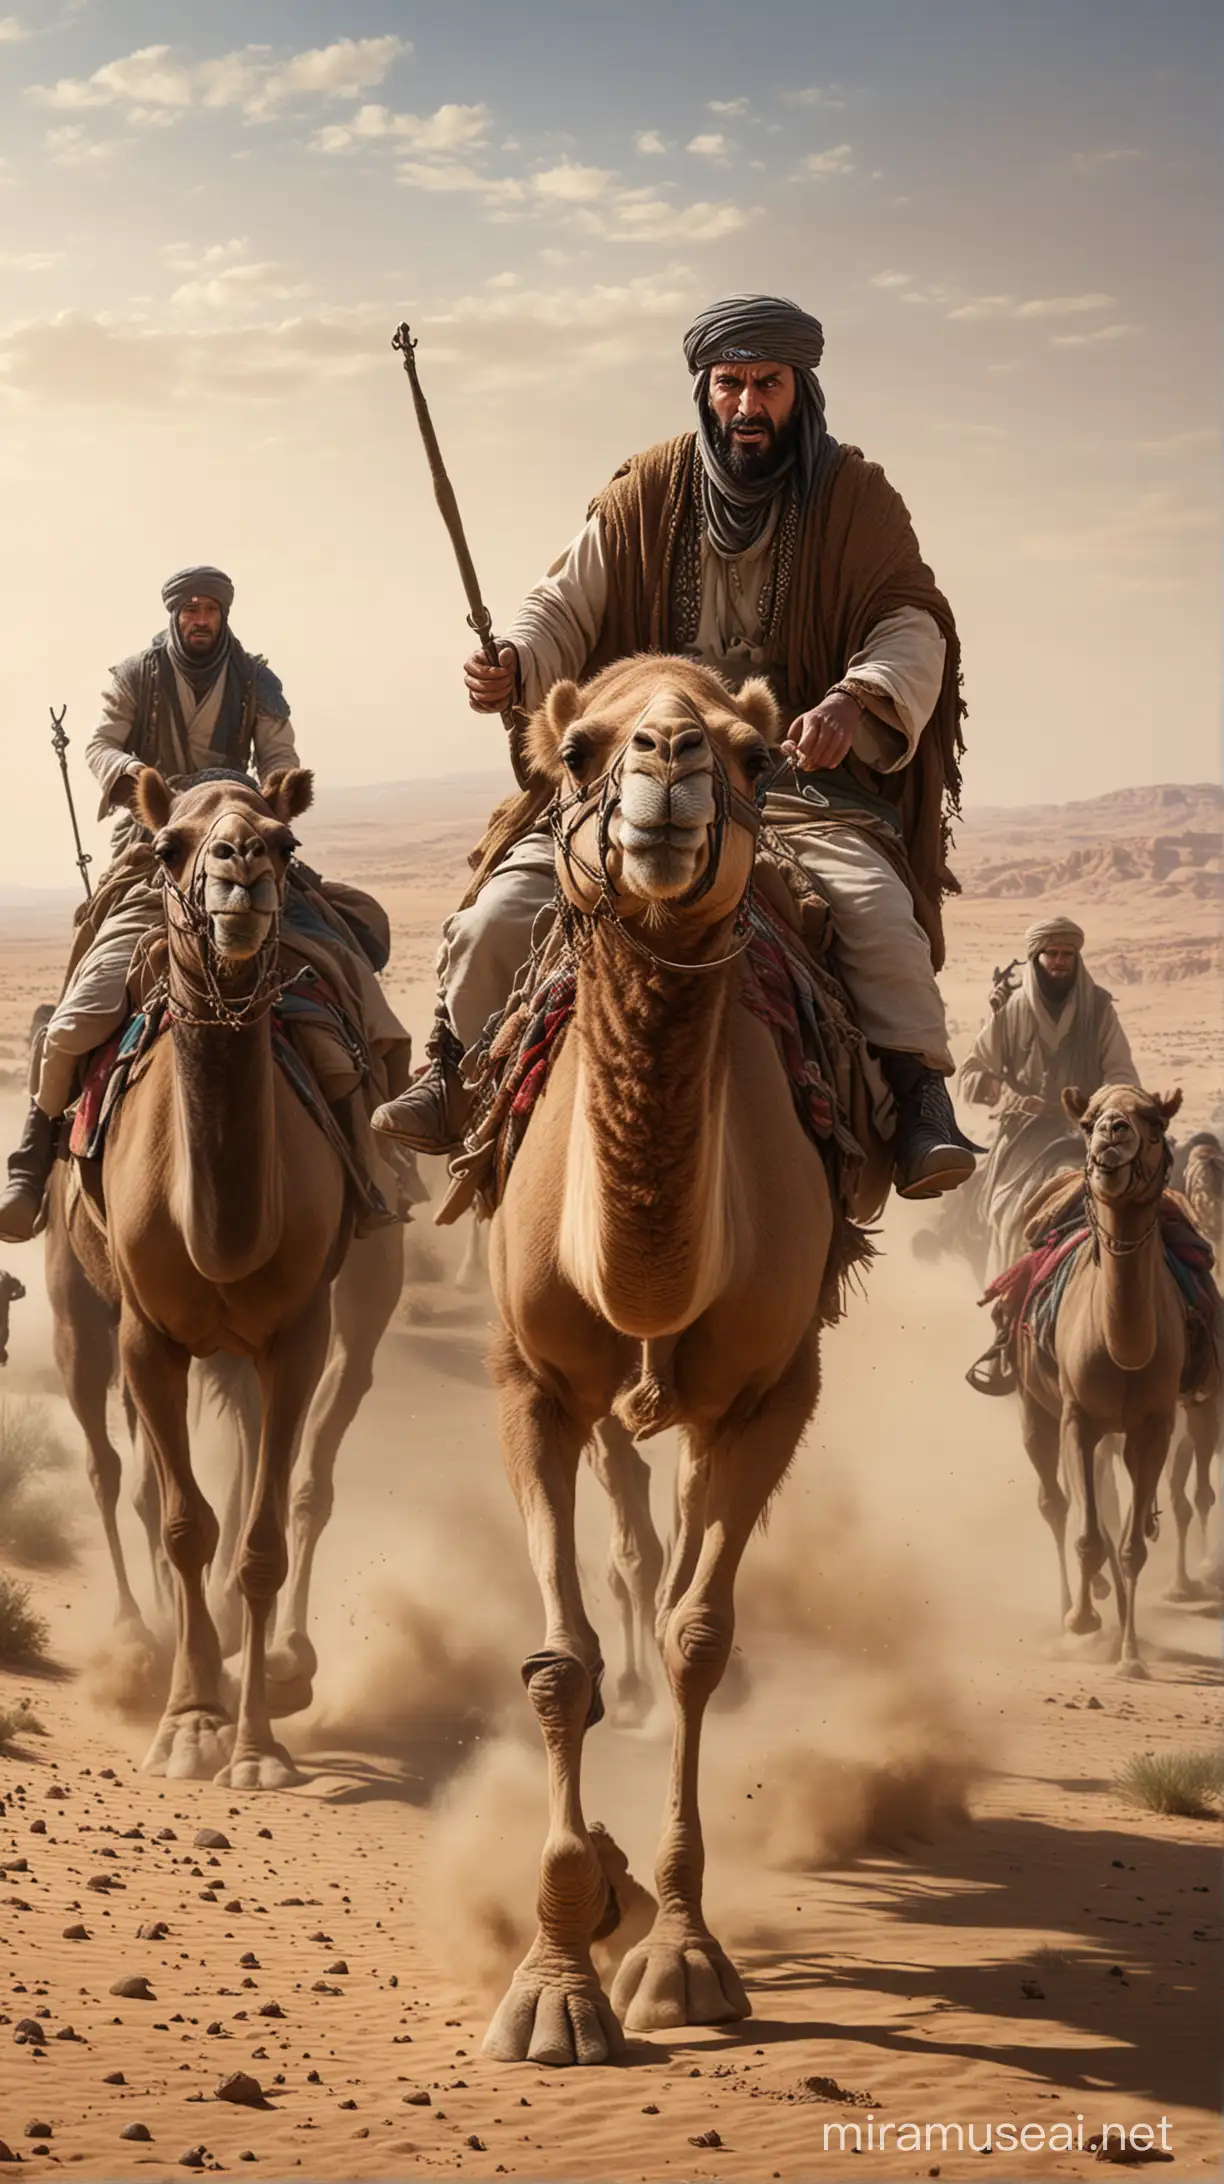 Saladin fleeing on a camel, fear in his eyes as Baldwin's forces close in behind him. hyper realistic